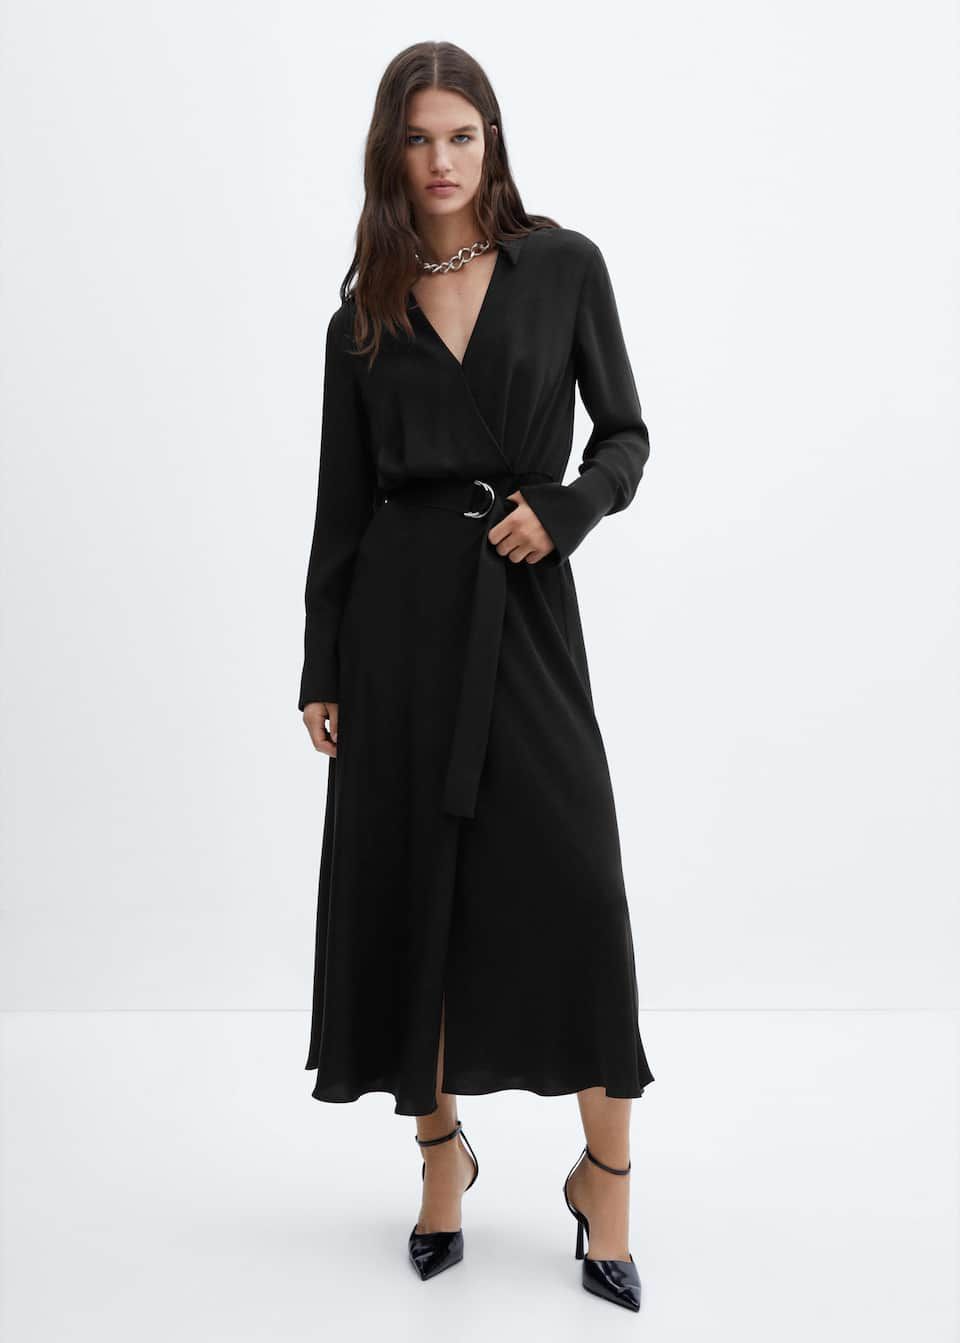 What to wear to a funeral: funeral dresses and things to avoid